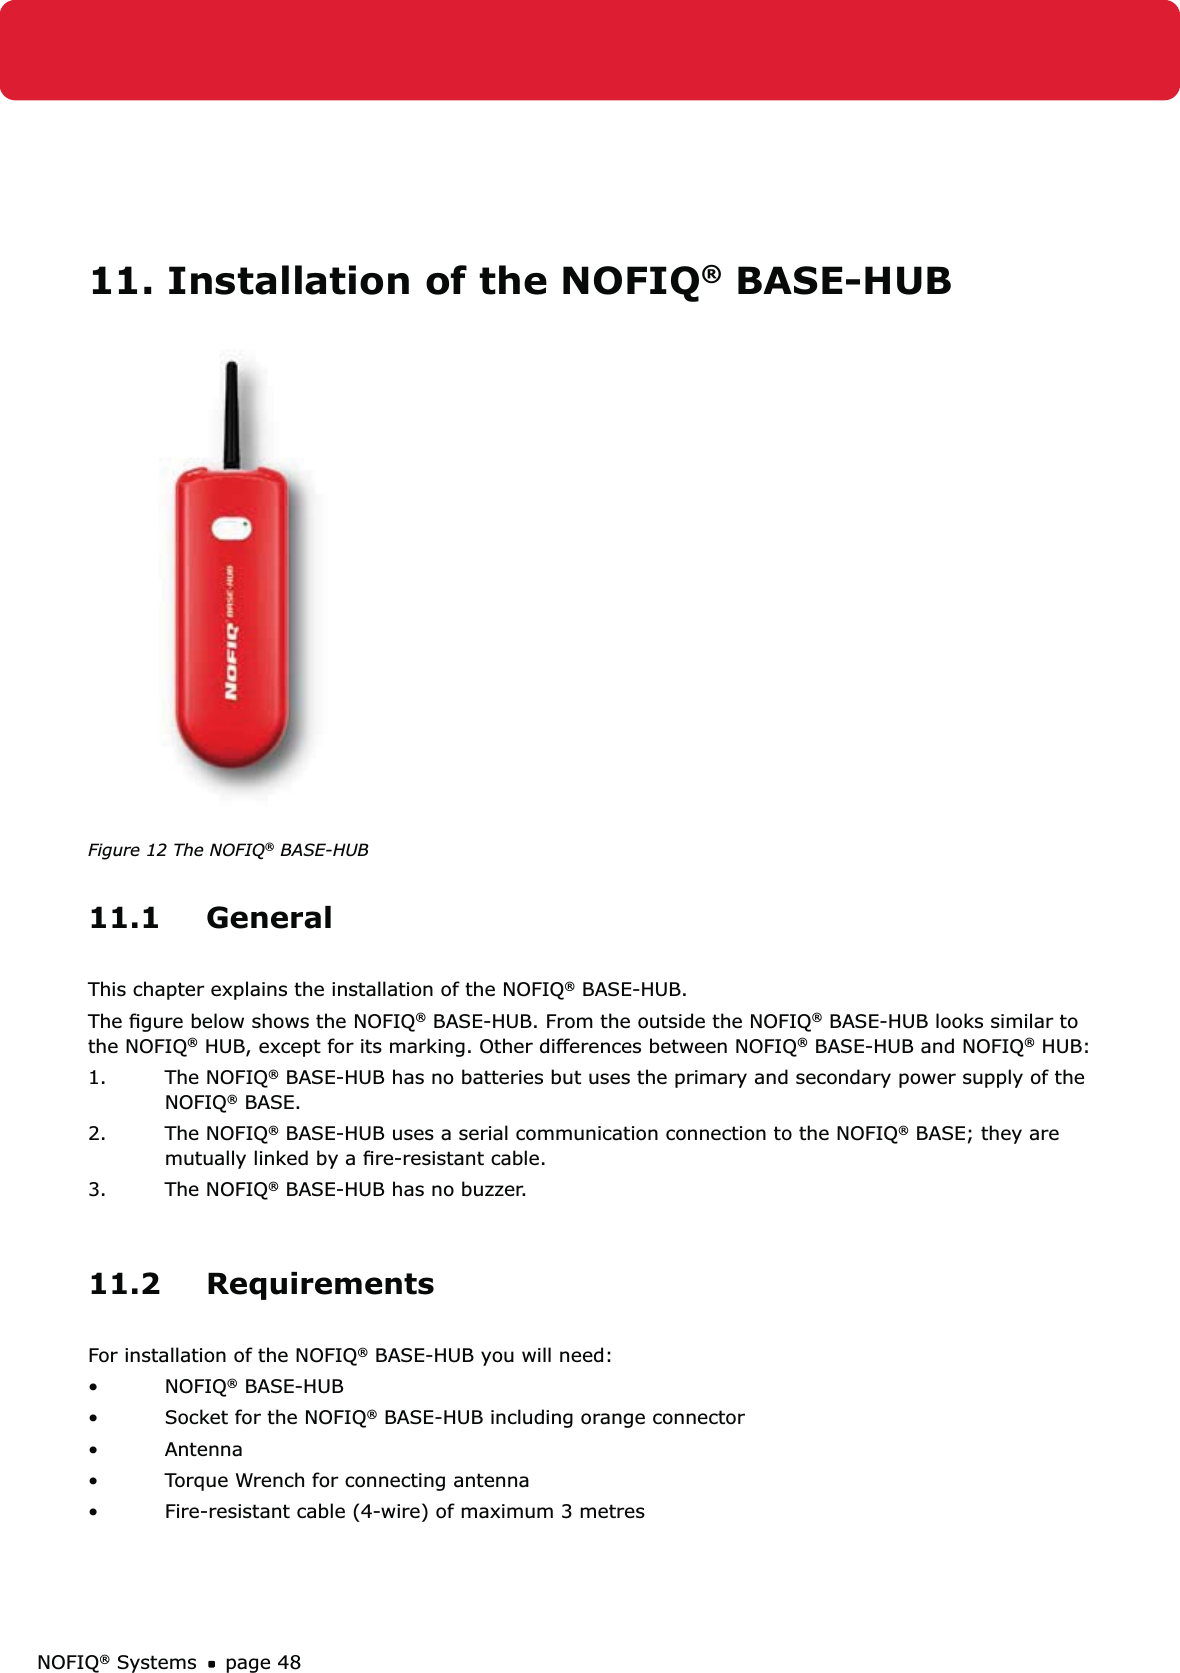 NOFIQ® Systems page 4811. Installation of the NOFIQ® BASE-HUB Figure 12 The NOFIQ® BASE-HUB11.1 GeneralThis chapter explains the installation of the NOFIQ® BASE-HUB.The ﬁgure below shows the NOFIQ® BASE-HUB. From the outside the NOFIQ® BASE-HUB looks similar to the NOFIQ® HUB, except for its marking. Other differences between NOFIQ® BASE-HUB and NOFIQ® HUB:1. The NOFIQ® BASE-HUB has no batteries but uses the primary and secondary power supply of the NOFIQ® BASE. 2. The NOFIQ® BASE-HUB uses a serial communication connection to the NOFIQ® BASE; they are mutually linked by a ﬁre-resistant cable.3. The NOFIQ® BASE-HUB has no buzzer.11.2 RequirementsFor installation of the NOFIQ® BASE-HUB you will need:NOFIQ•  ® BASE-HUBSocket for the NOFIQ•  ® BASE-HUB including orange connectorAntenna• Torque Wrench for connecting antenna• Fire-resistant cable (4-wire) of maximum 3 metres • 